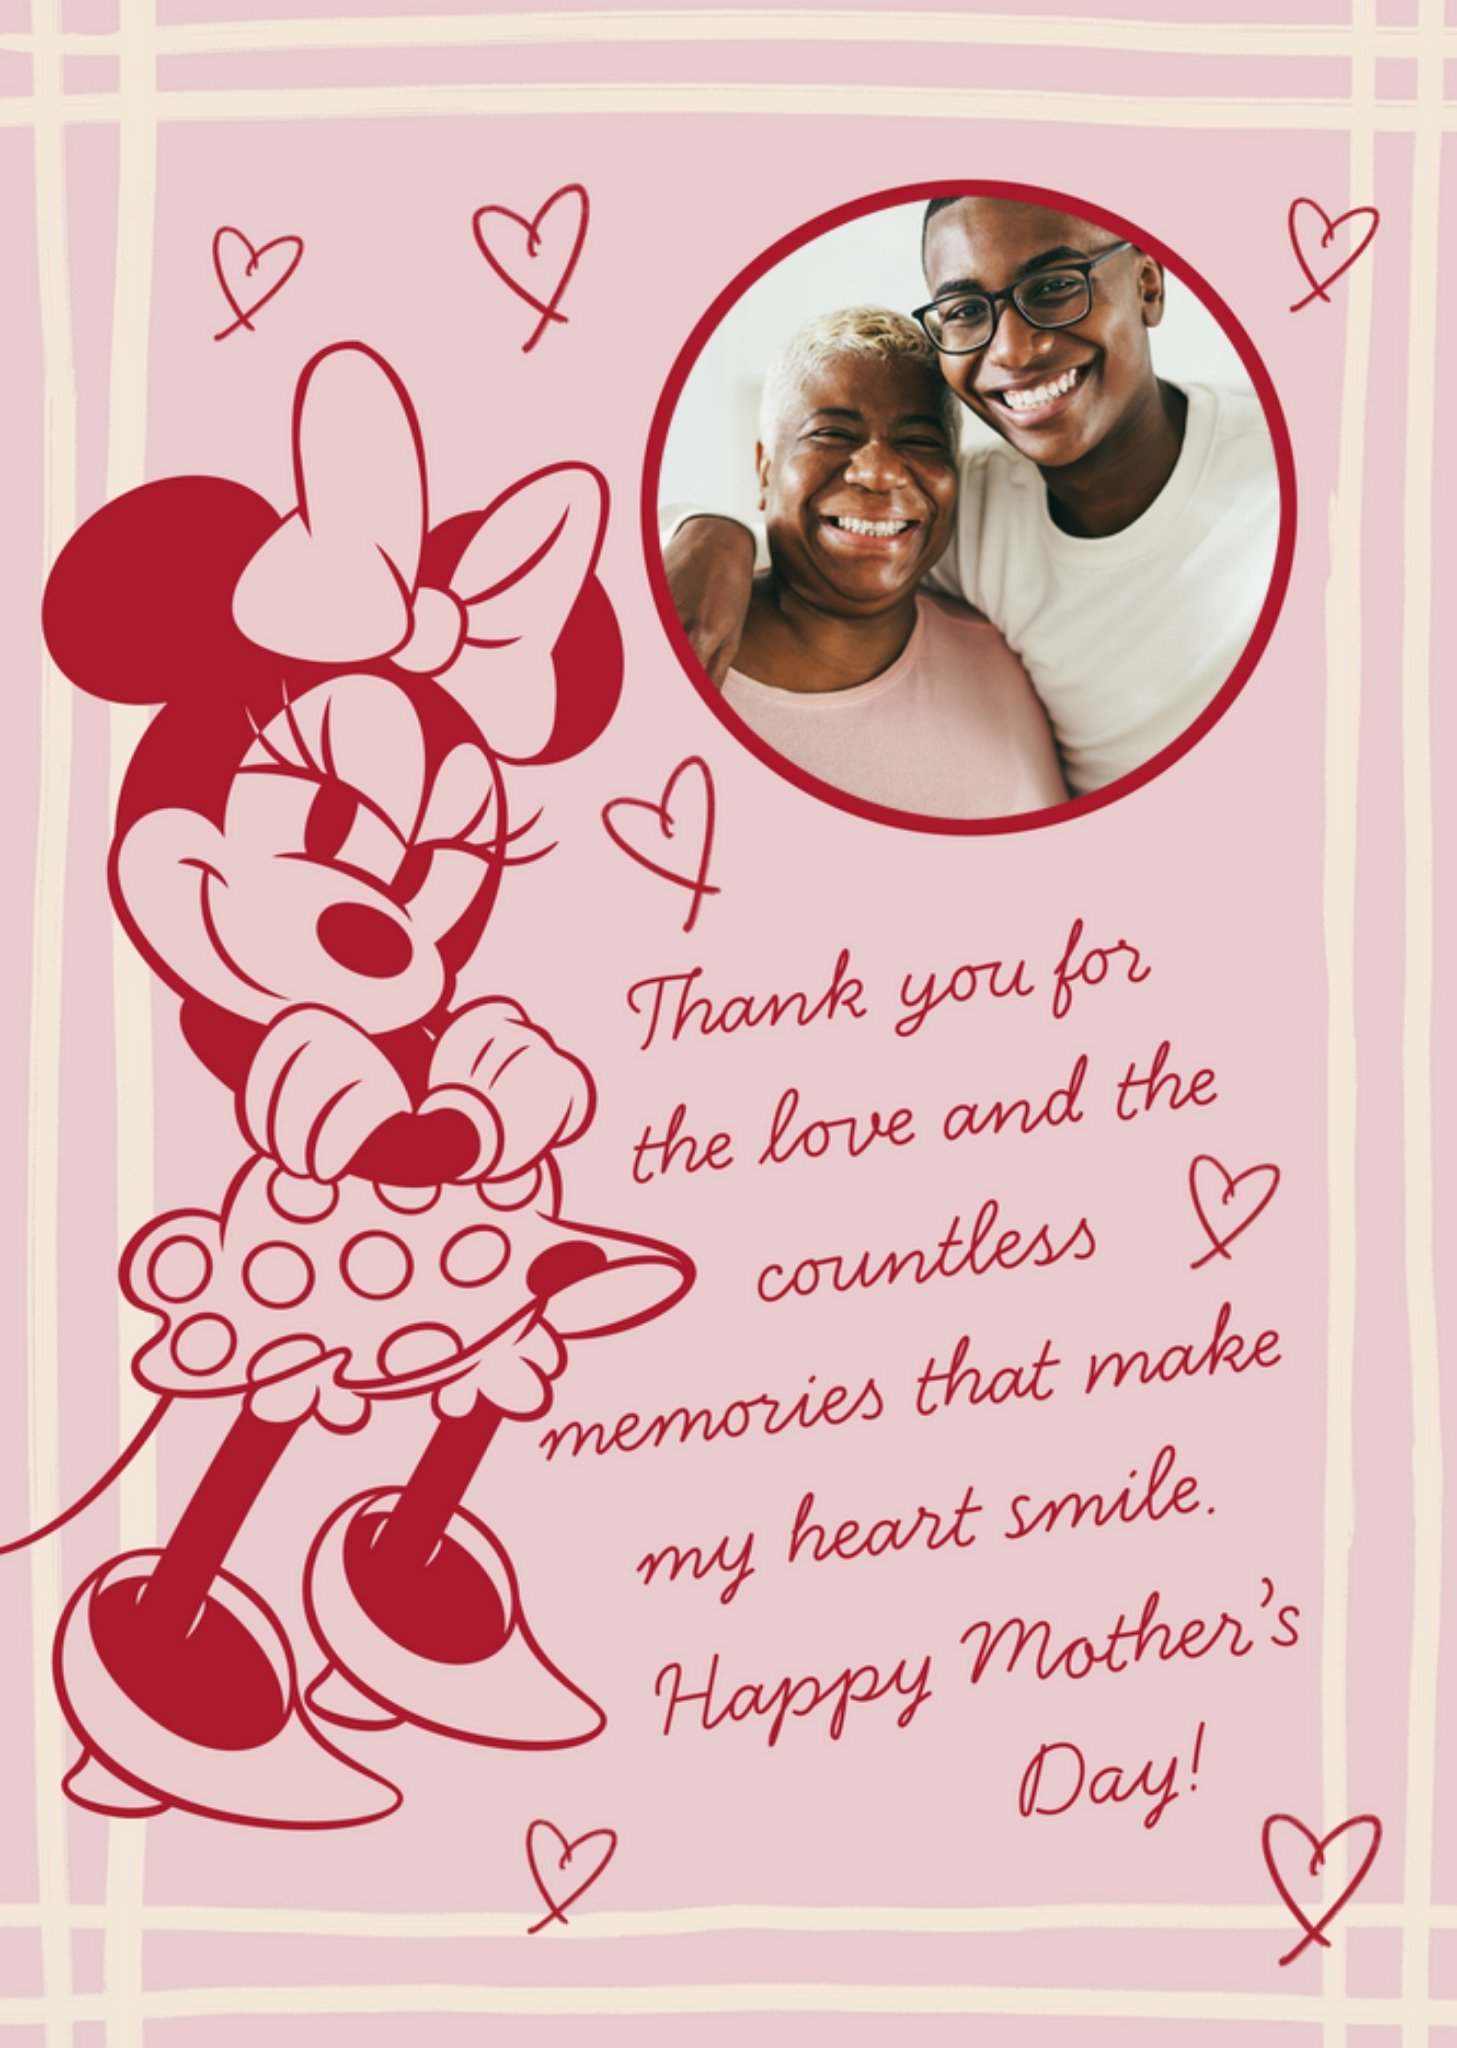 Mickey Mouse Disney Minnie Mouse Love And Countless Memories Photo Upload Happy Mother's Day Card, L